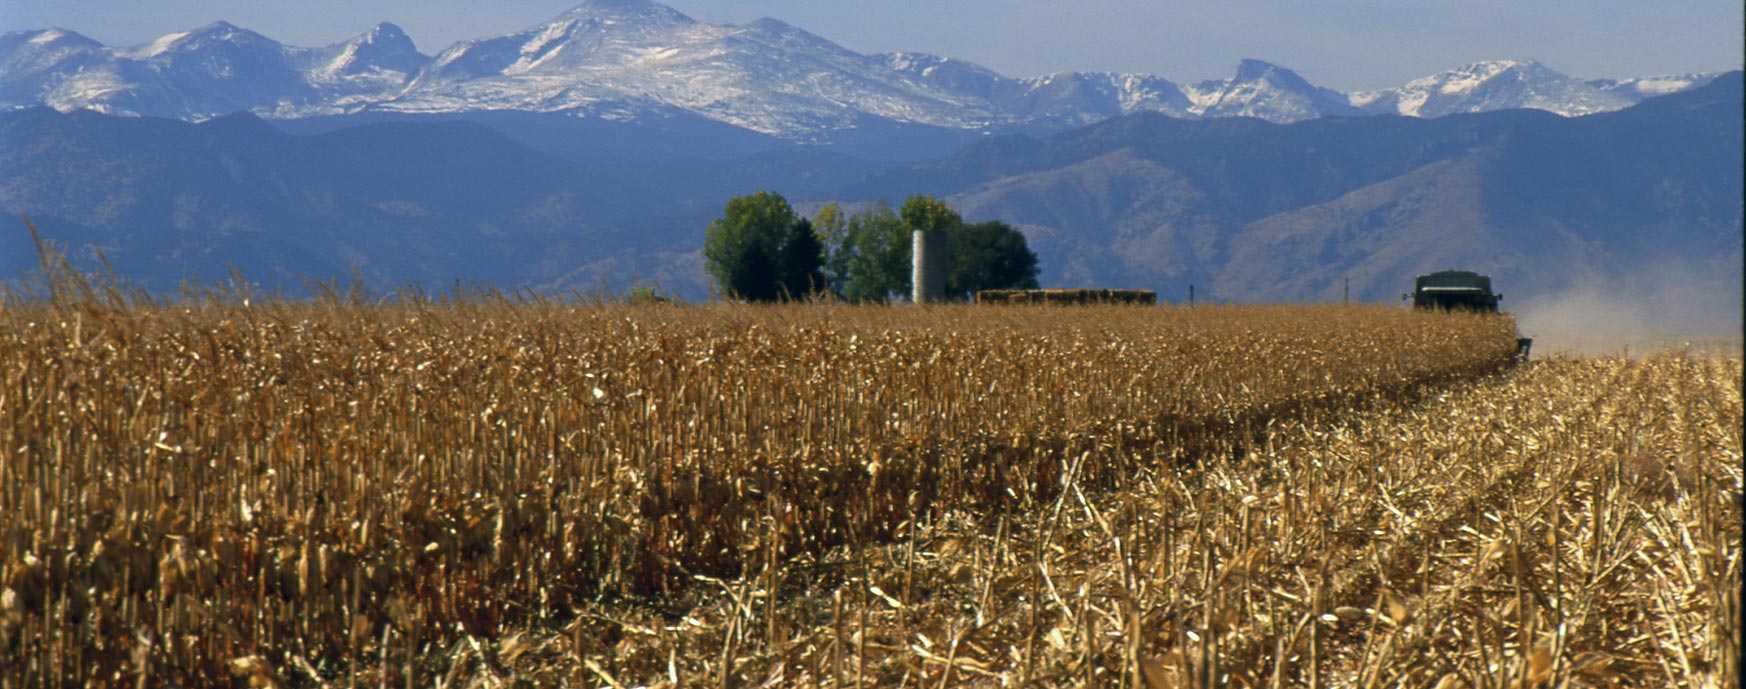 Cornstalks in a field with mountains in the background.